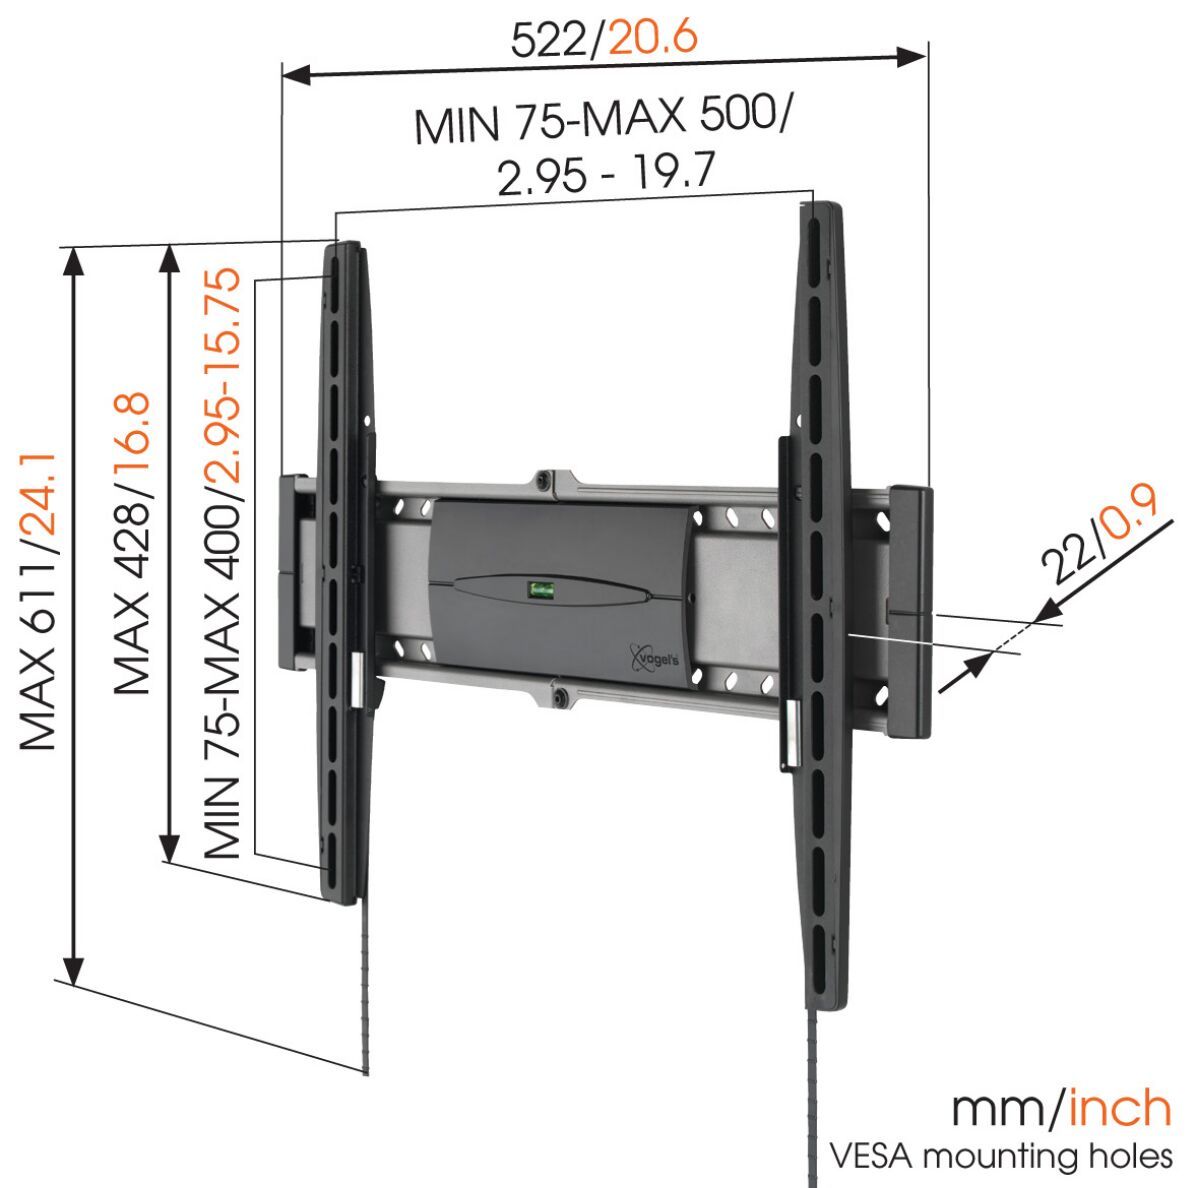 Vogel's EFW 8206 Fixed TV Wall Mount - Suitable for 32 up to 55 inch TVs up to Dimensions